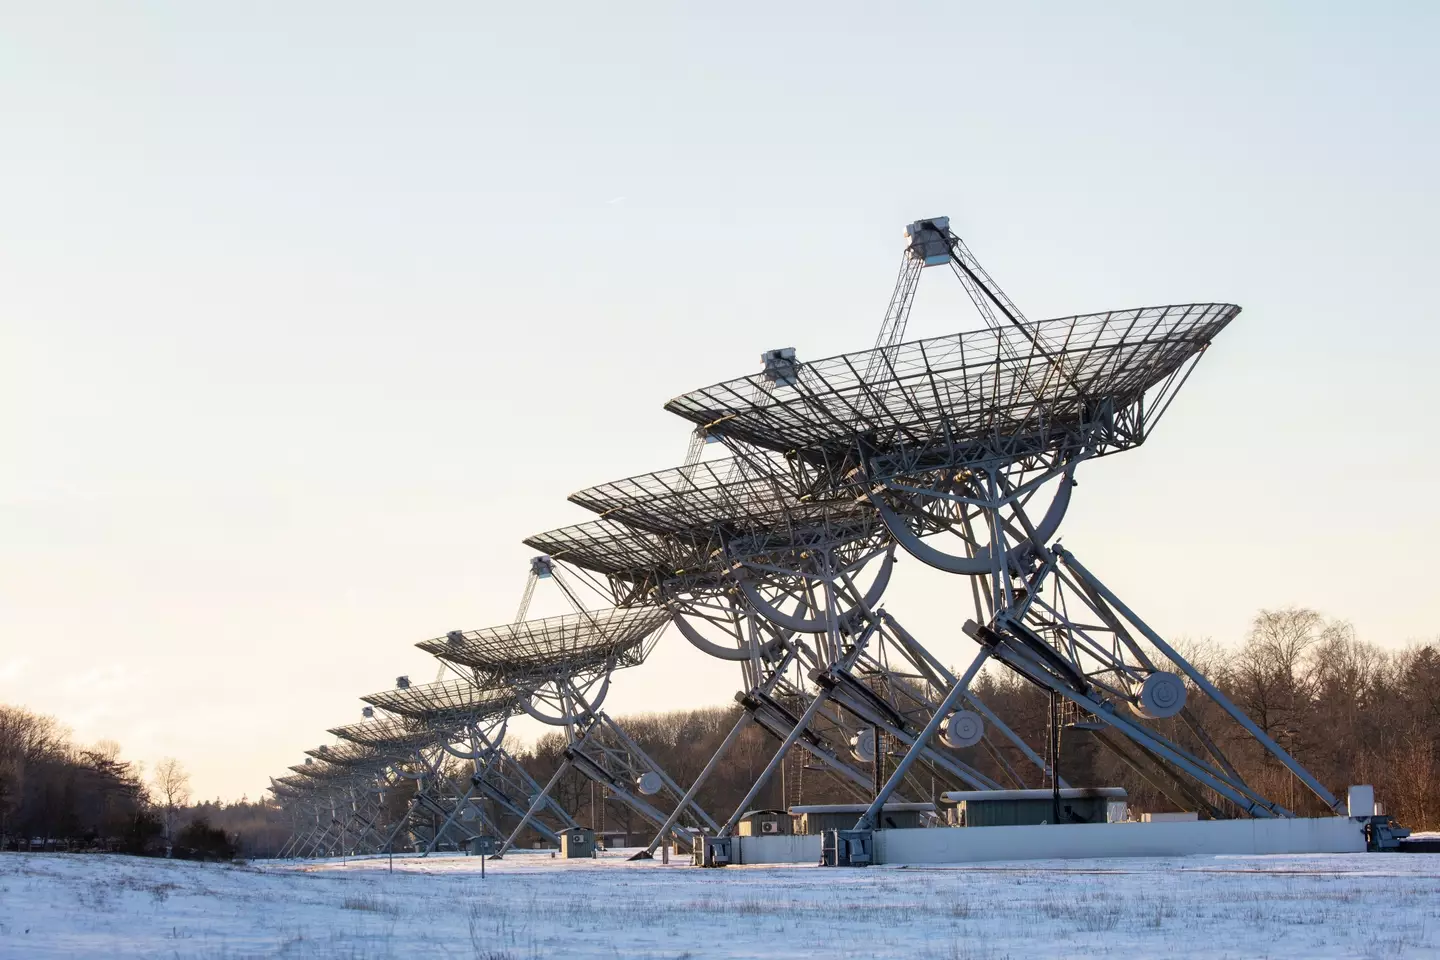 The FRBs were uncovered when the Westerbork Synthesis Radio Telescope in the Netherlands was upgraded.